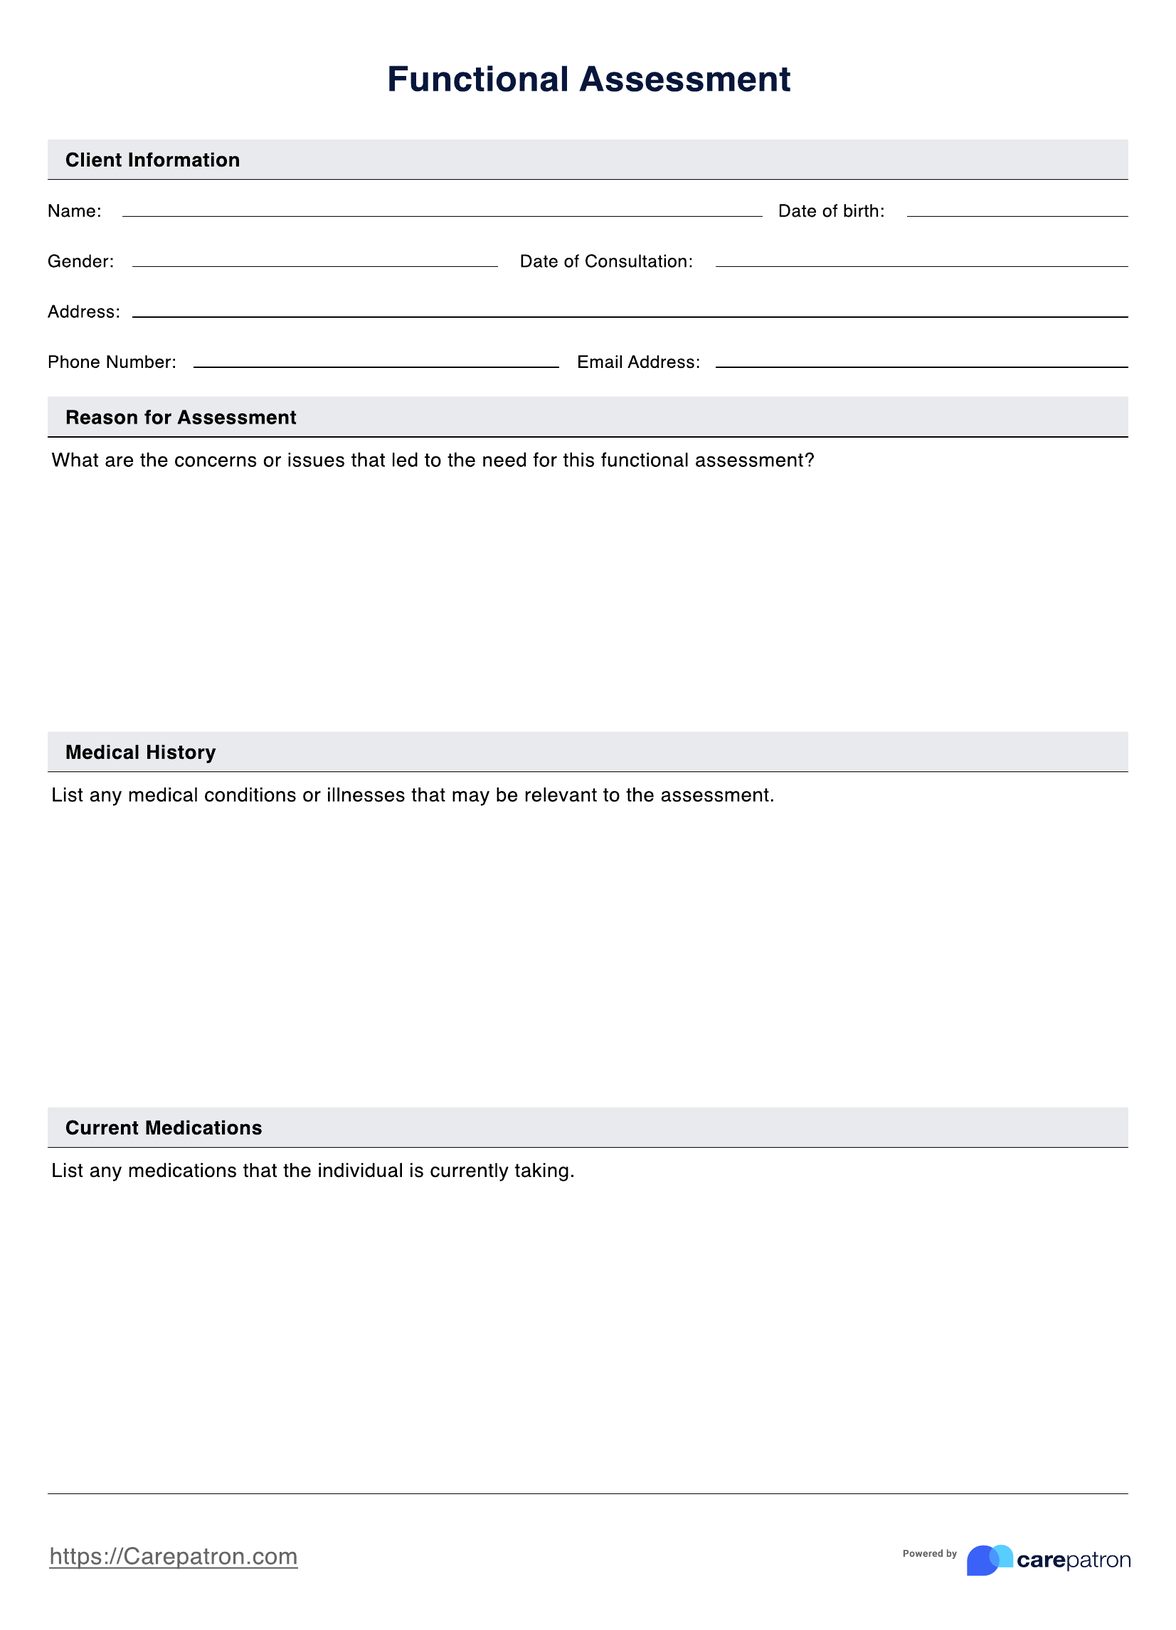 Functional Assessment PDF Example